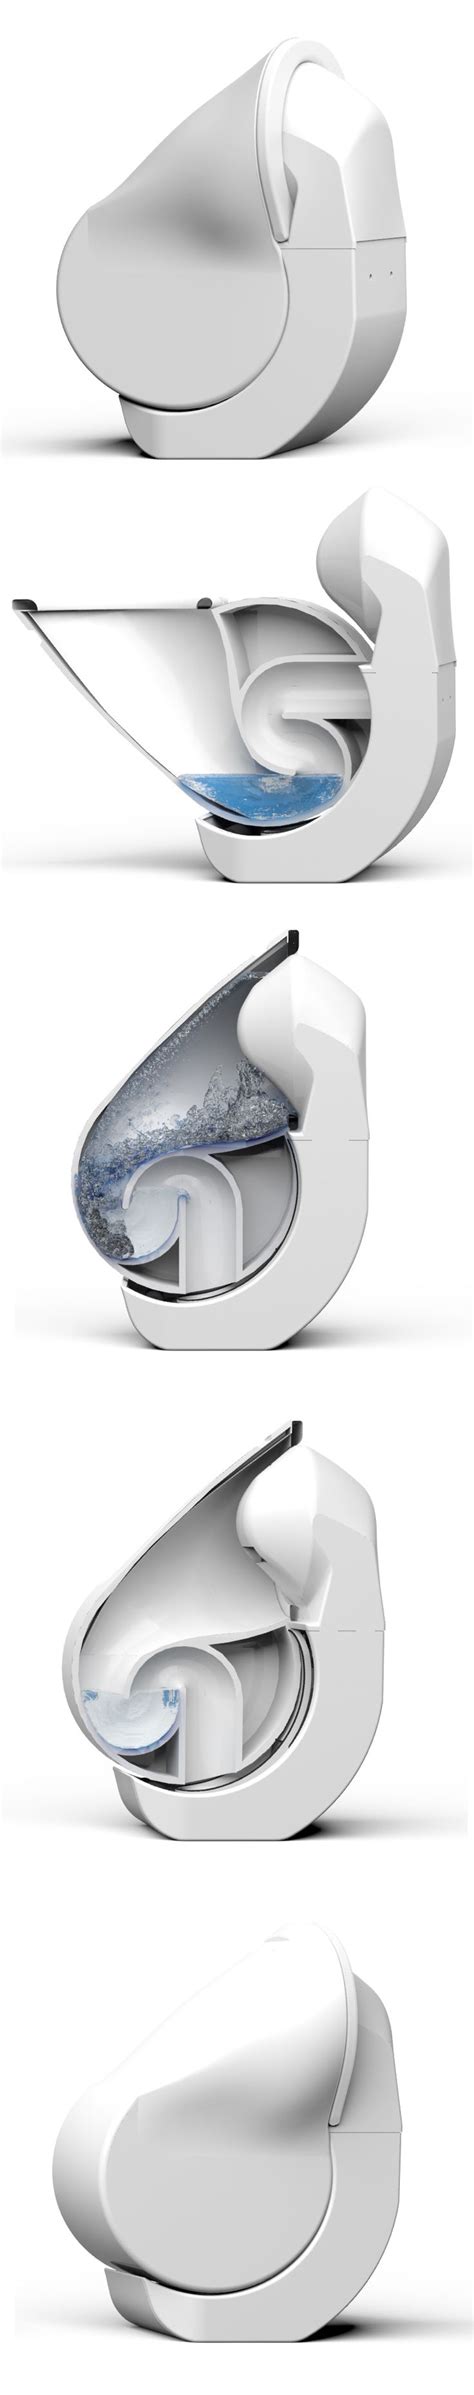 Iota Folding Toilet Reduces Its Size And Water Consumption Toilette